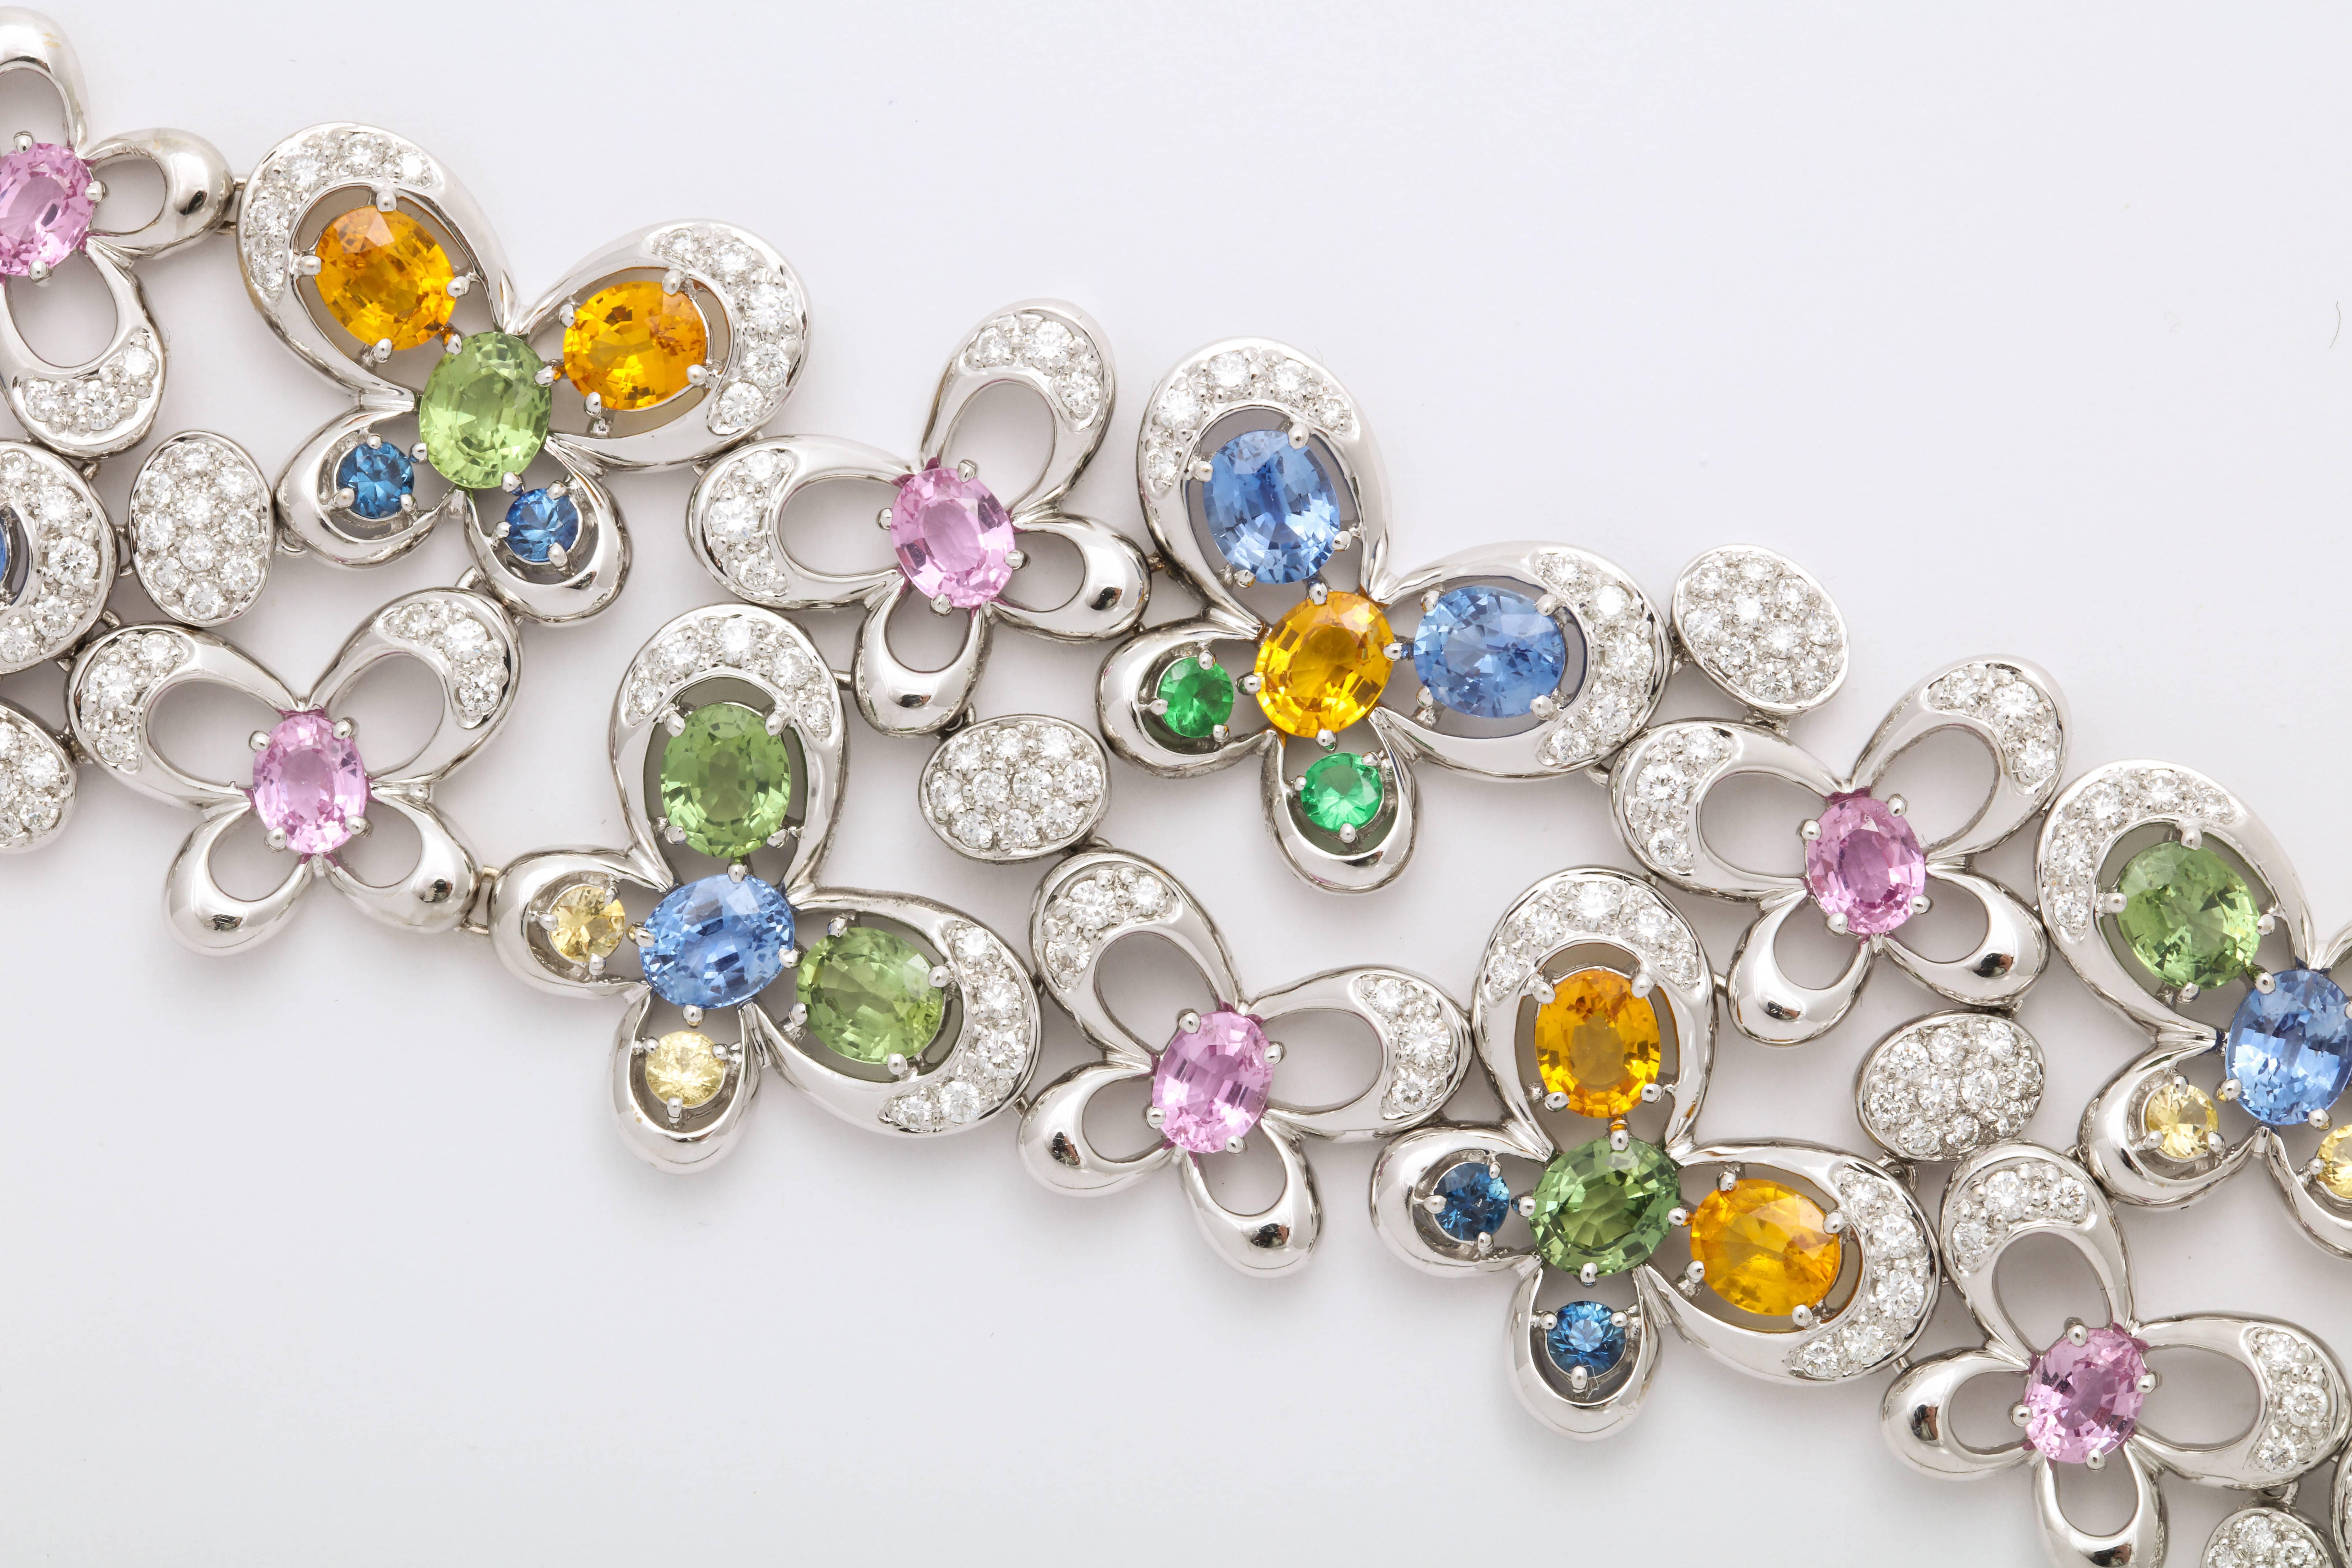 Festive 18 Karat White Gold articulating strap bracelet mounted with oval faceted blue and green sapphires: 2.96 carats; and pink and yellow sapphires: 7.73 carats, in the form of butterfly motifs, with staggered tsavorites (green garnets),